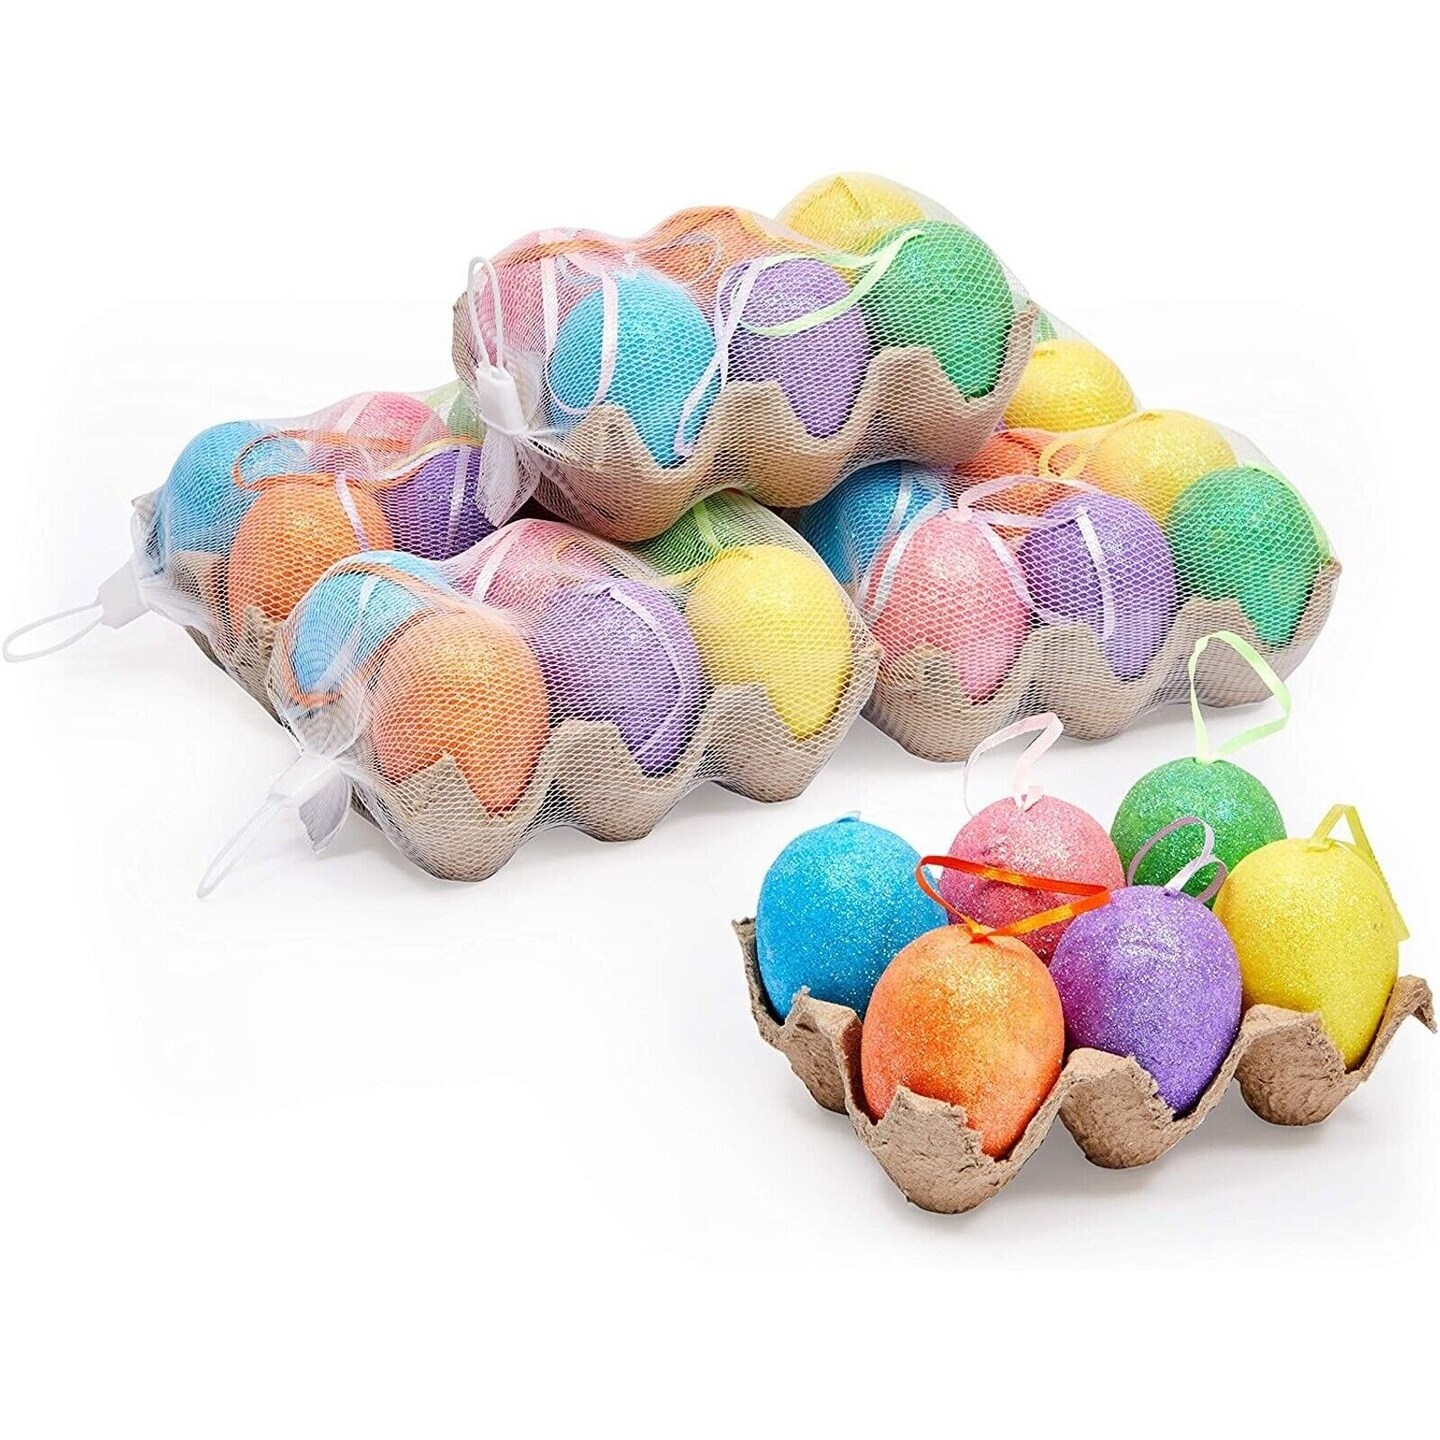 36x Easter Plastic Egg Ornaments for Holiday Home Decorations, Party Favor Decor